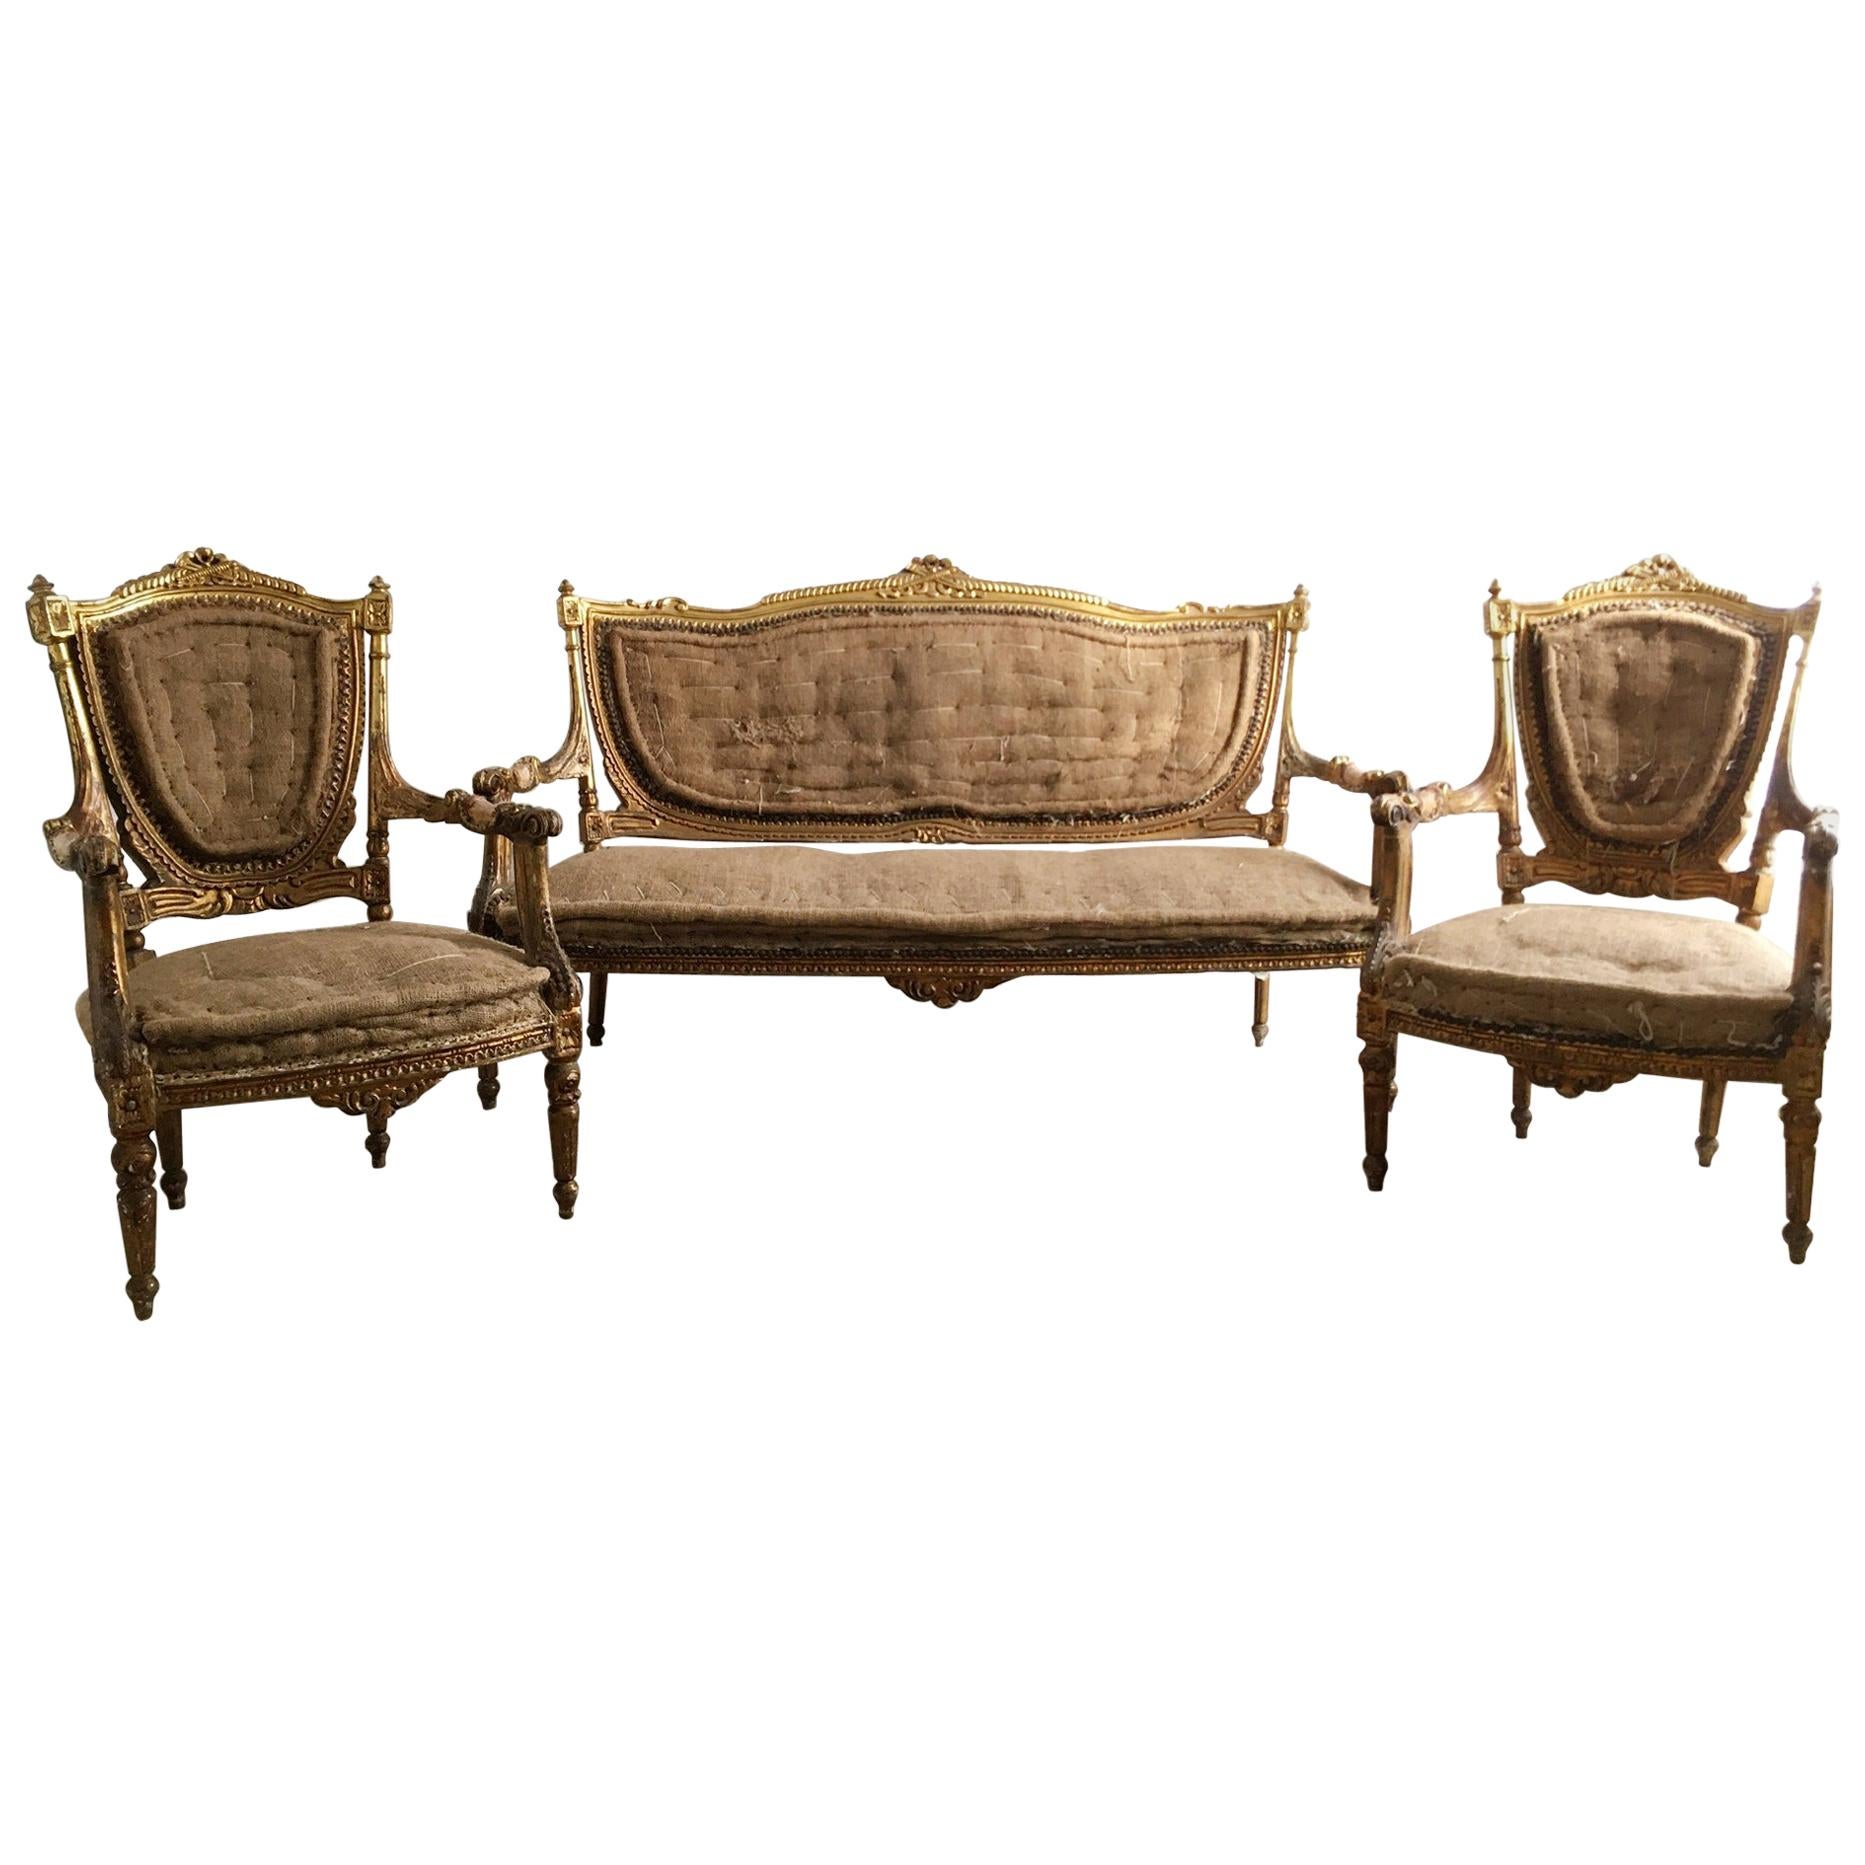 French Louis XVI Giltwood Salon Suite for Re-Upholstery